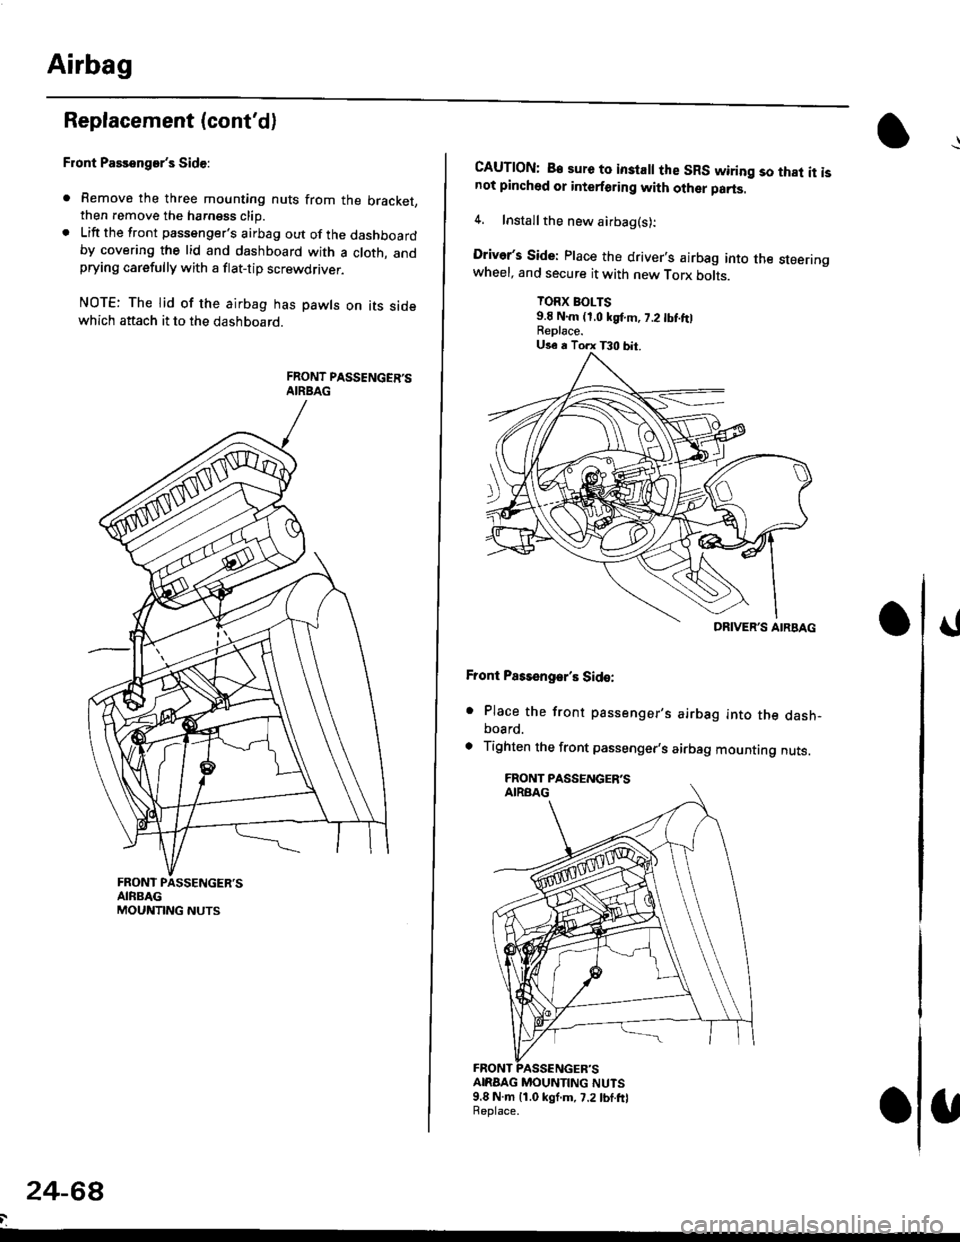 HONDA CIVIC 1997 6.G Service Manual Airbag
Replacement (contd)
Front Passengers Side:
. Remove the three mounting nuts from the bracket,then remove the harngss clip.. Lift the front passengers airbag out of the dashboardby covering t